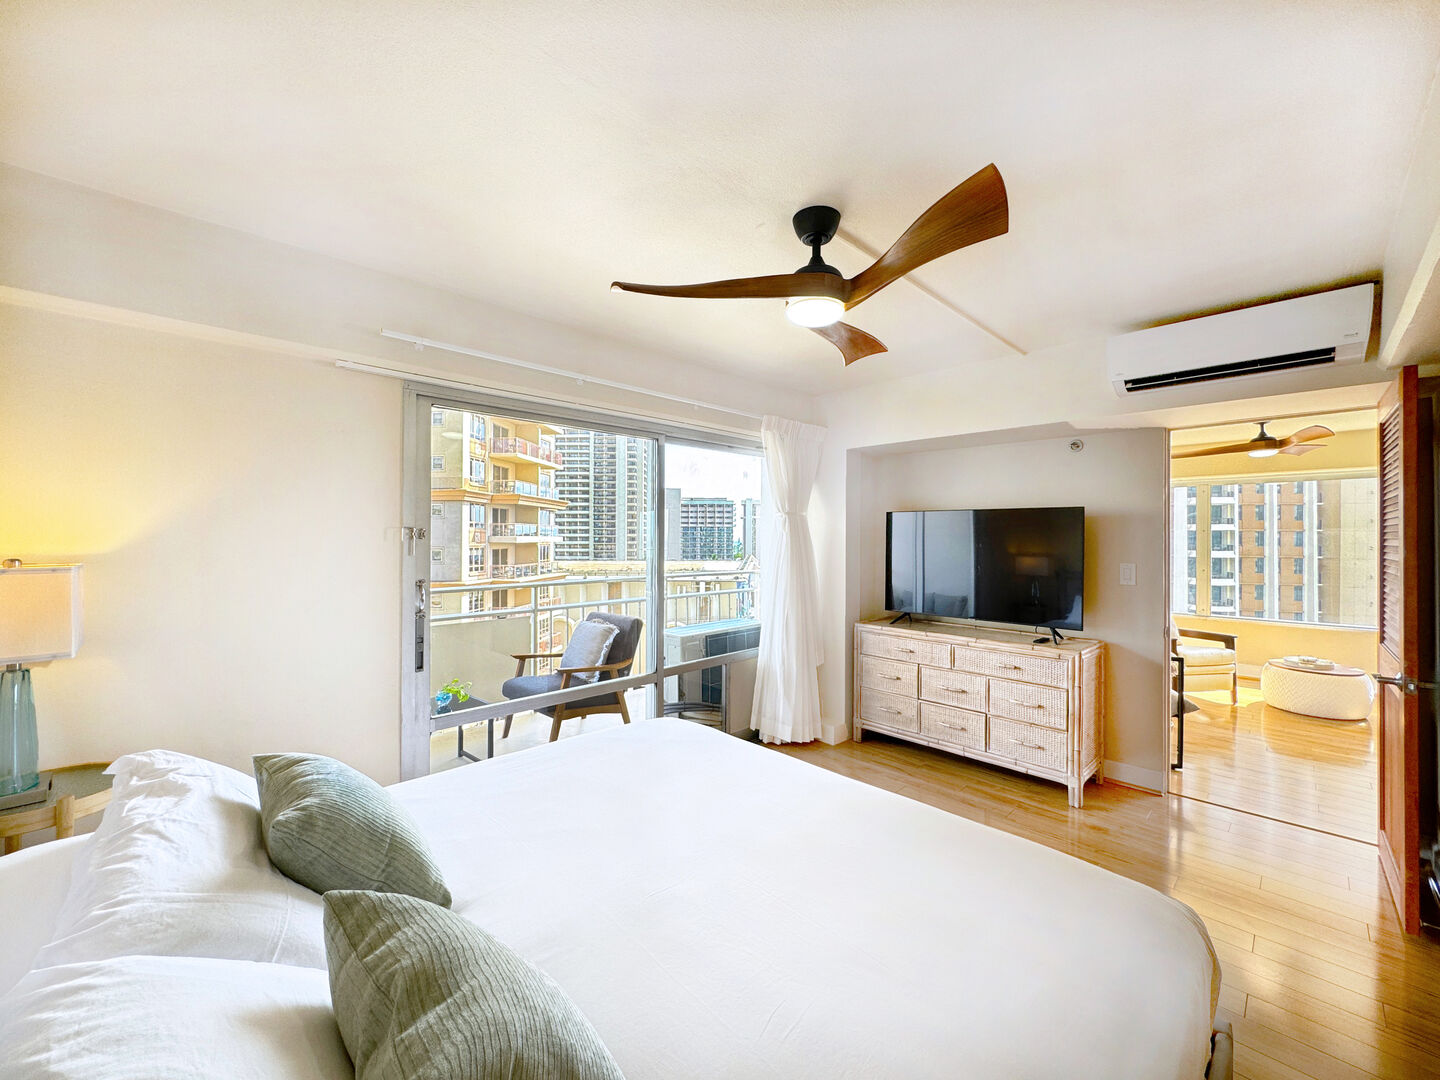 The master bedroom with king-size bed and Samsung smart TV.